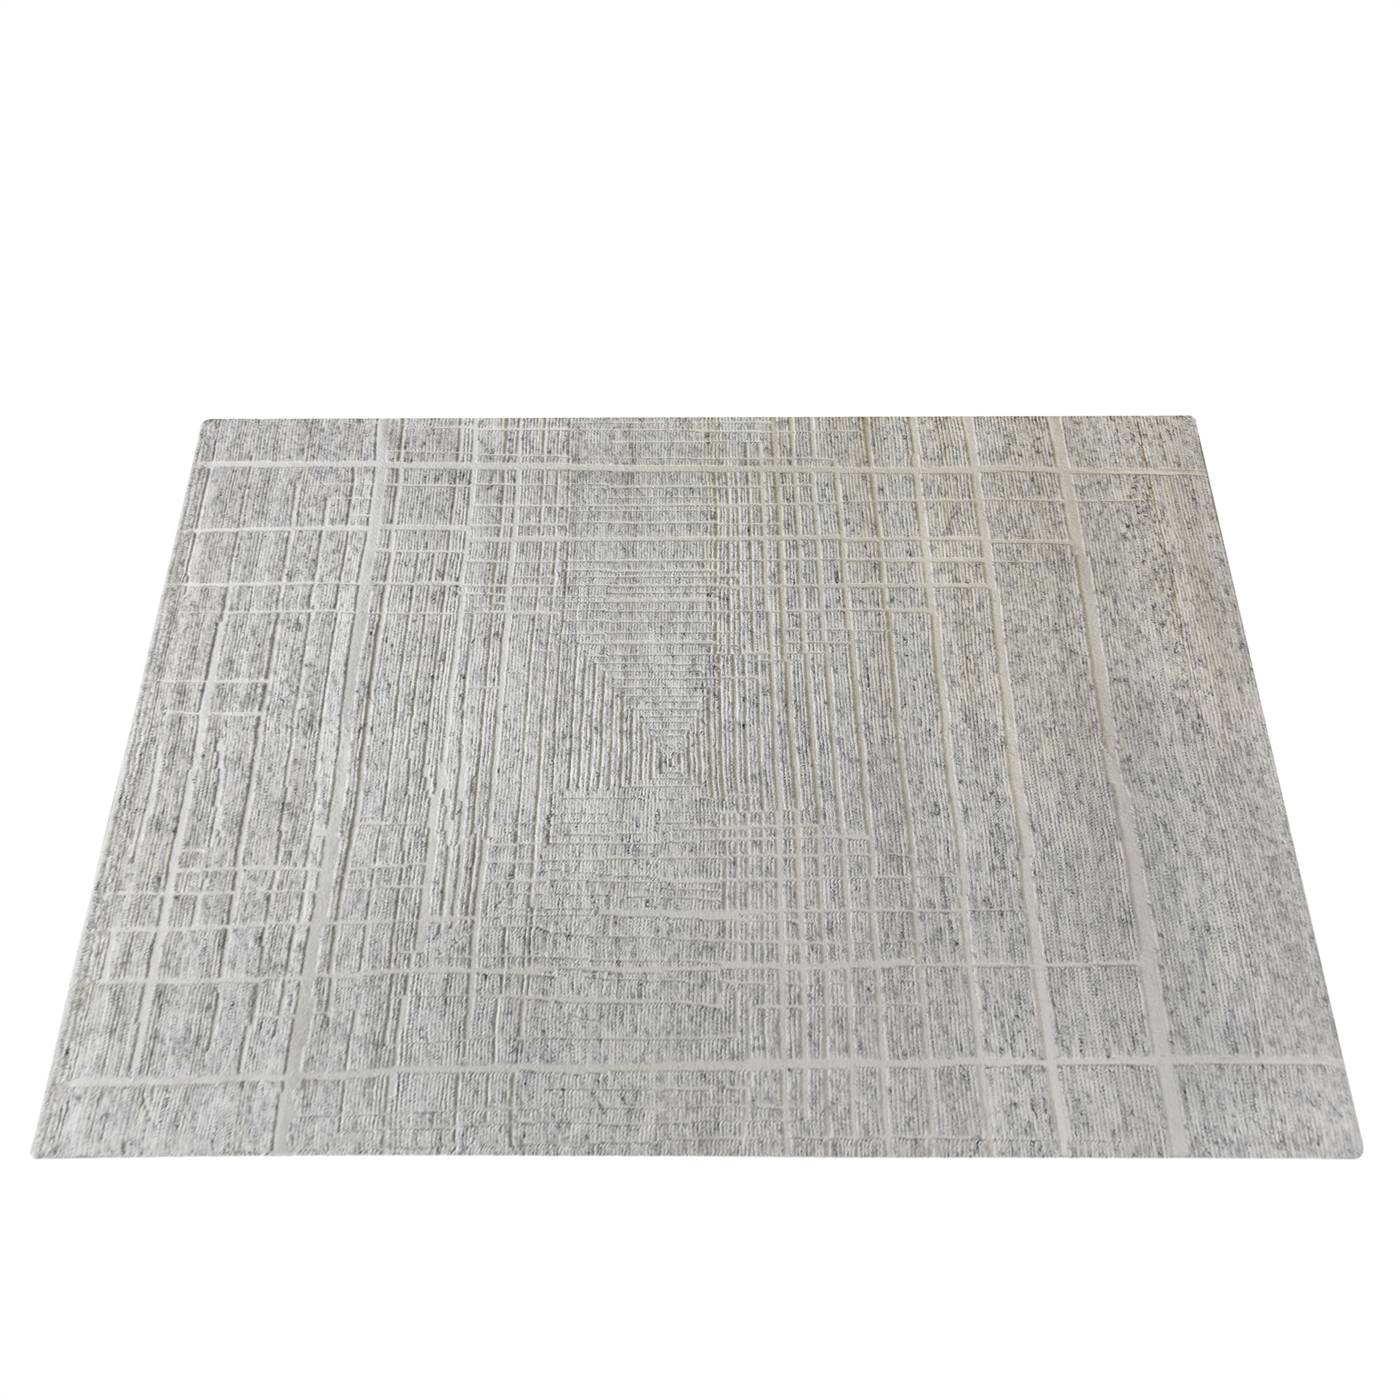 Area Rug, Bedroom Rug, Living Room Rug, Living Area Rug, Indian Rug, Office Carpet, Office Rug, Shop Rug Online, Natural White, Wool Viscose Blend , Hand Knotted , Handknotted, All Cut, Intricate 